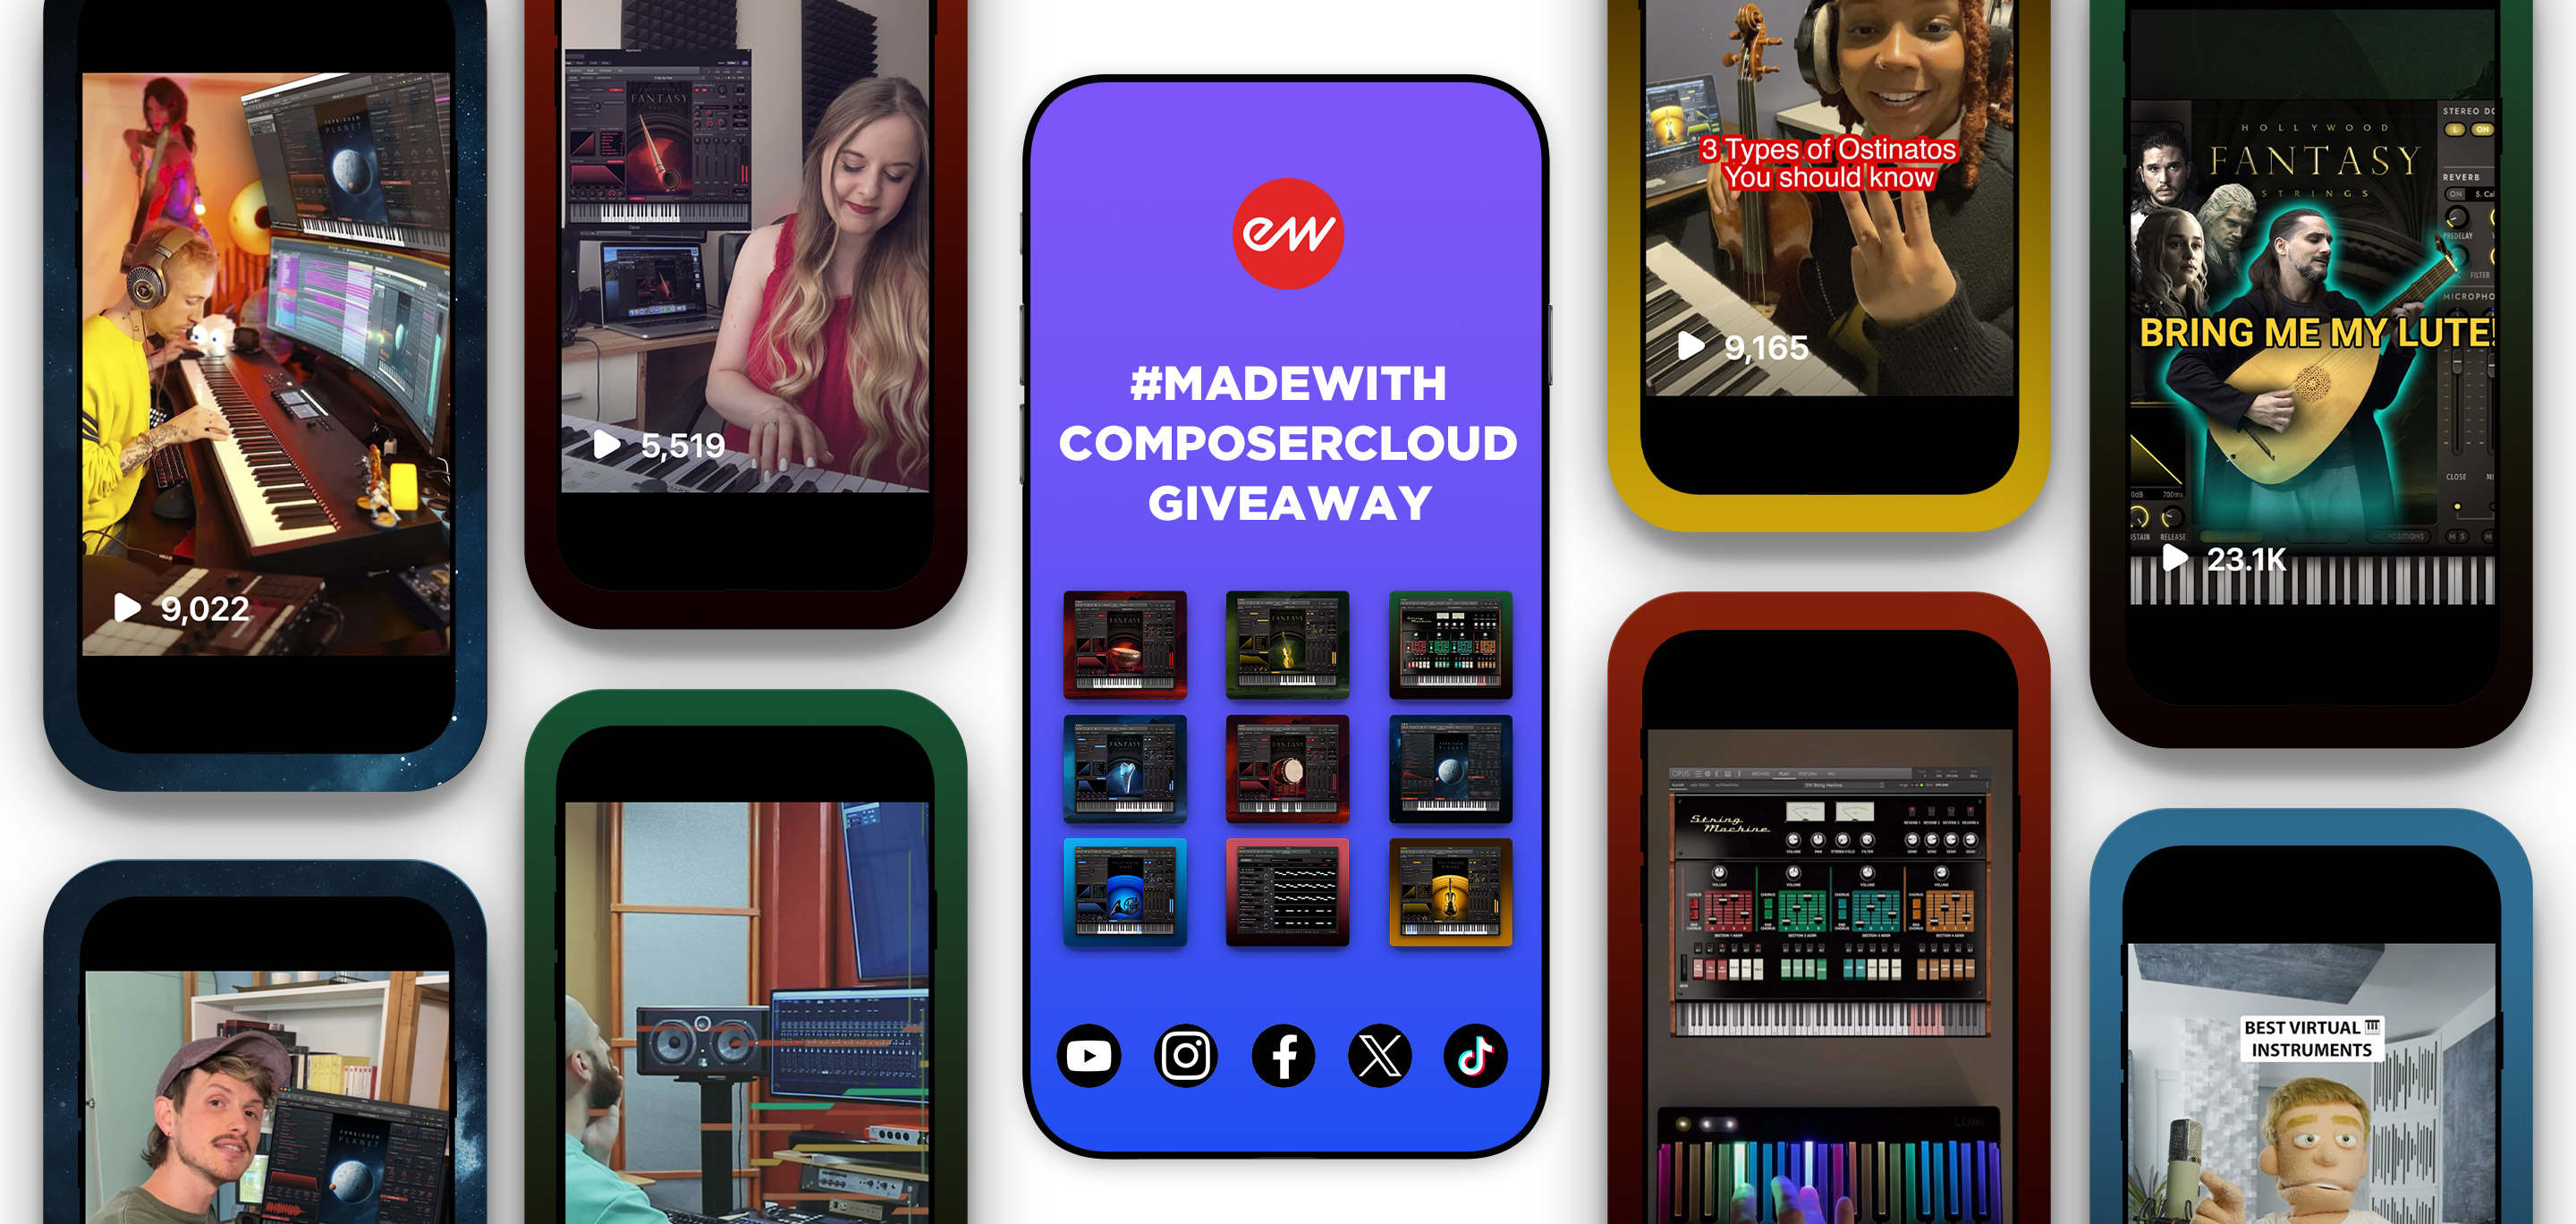 EastWest ComposerCloud+ Giveaway - Enter for a Chance to Win one of 50 ComposerCloud+ Gift Cards